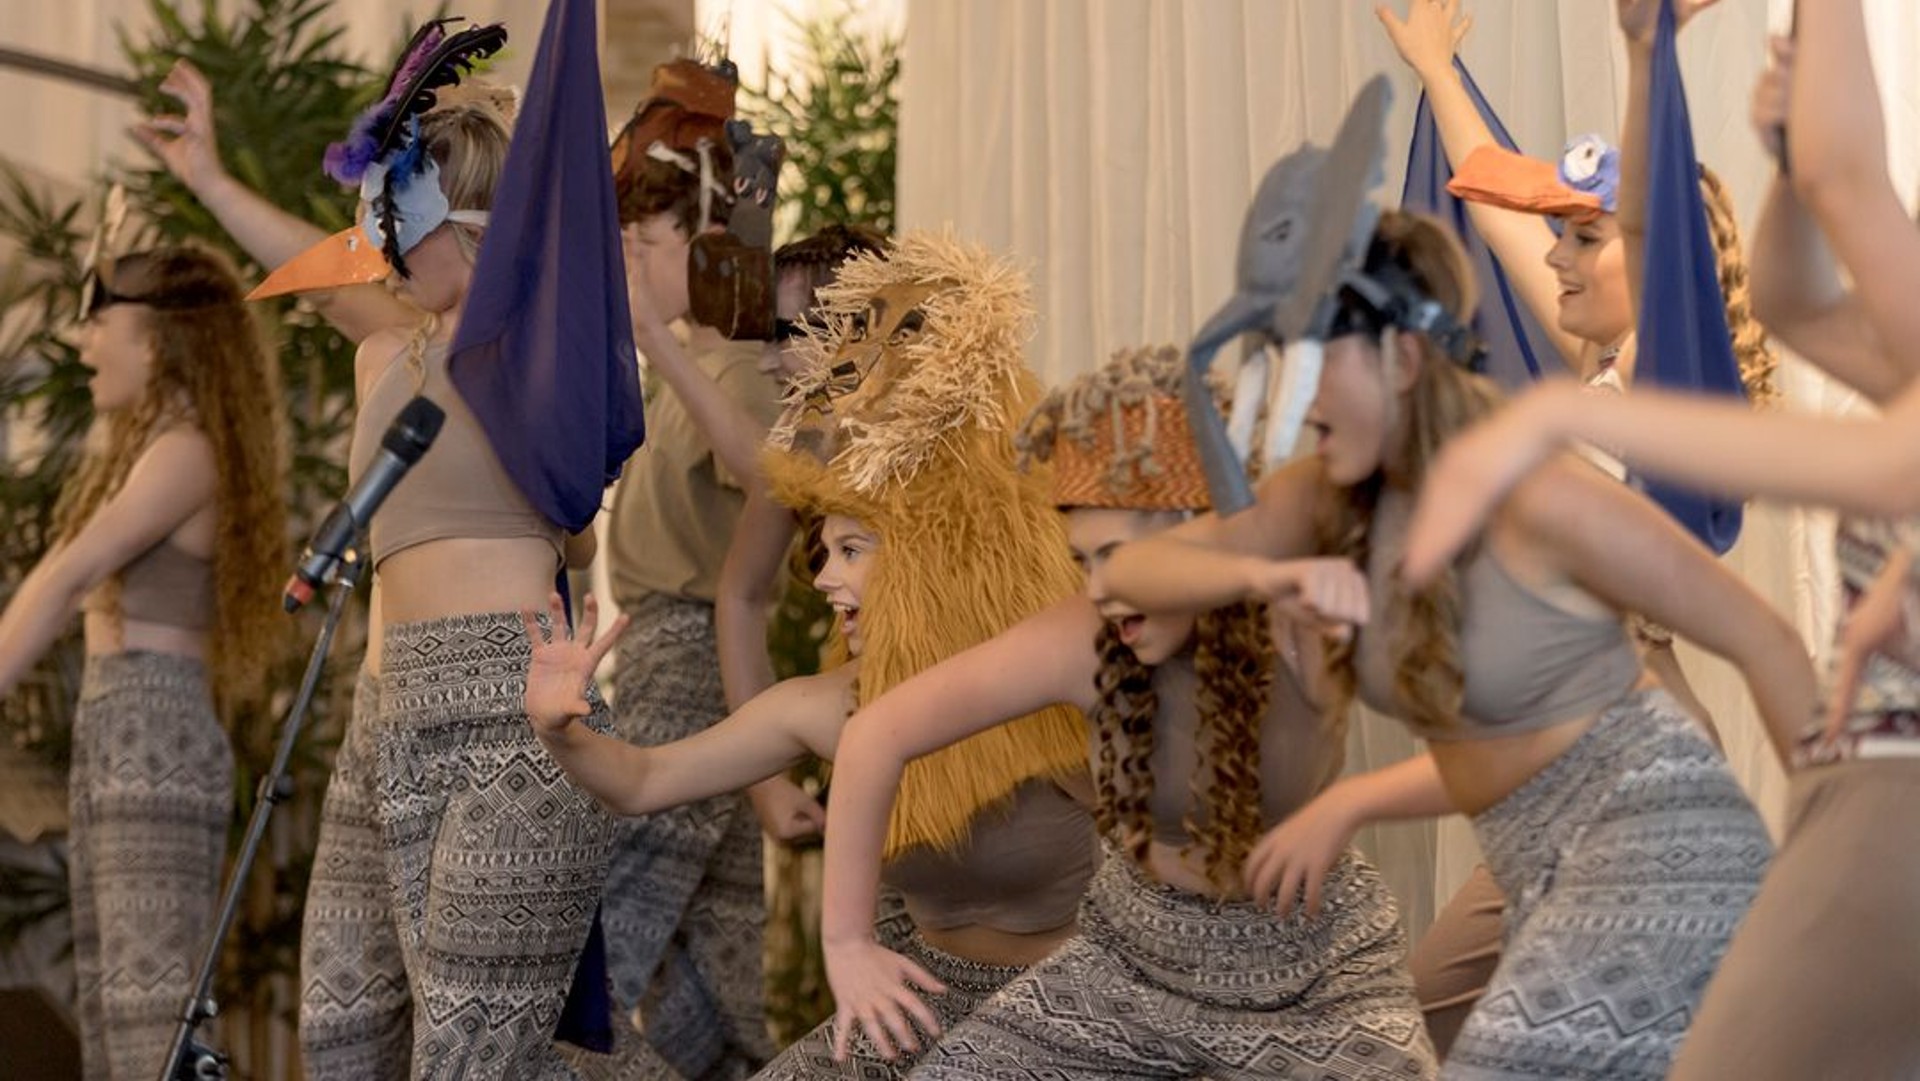 A group of young people dancing on stage wearing lion masks